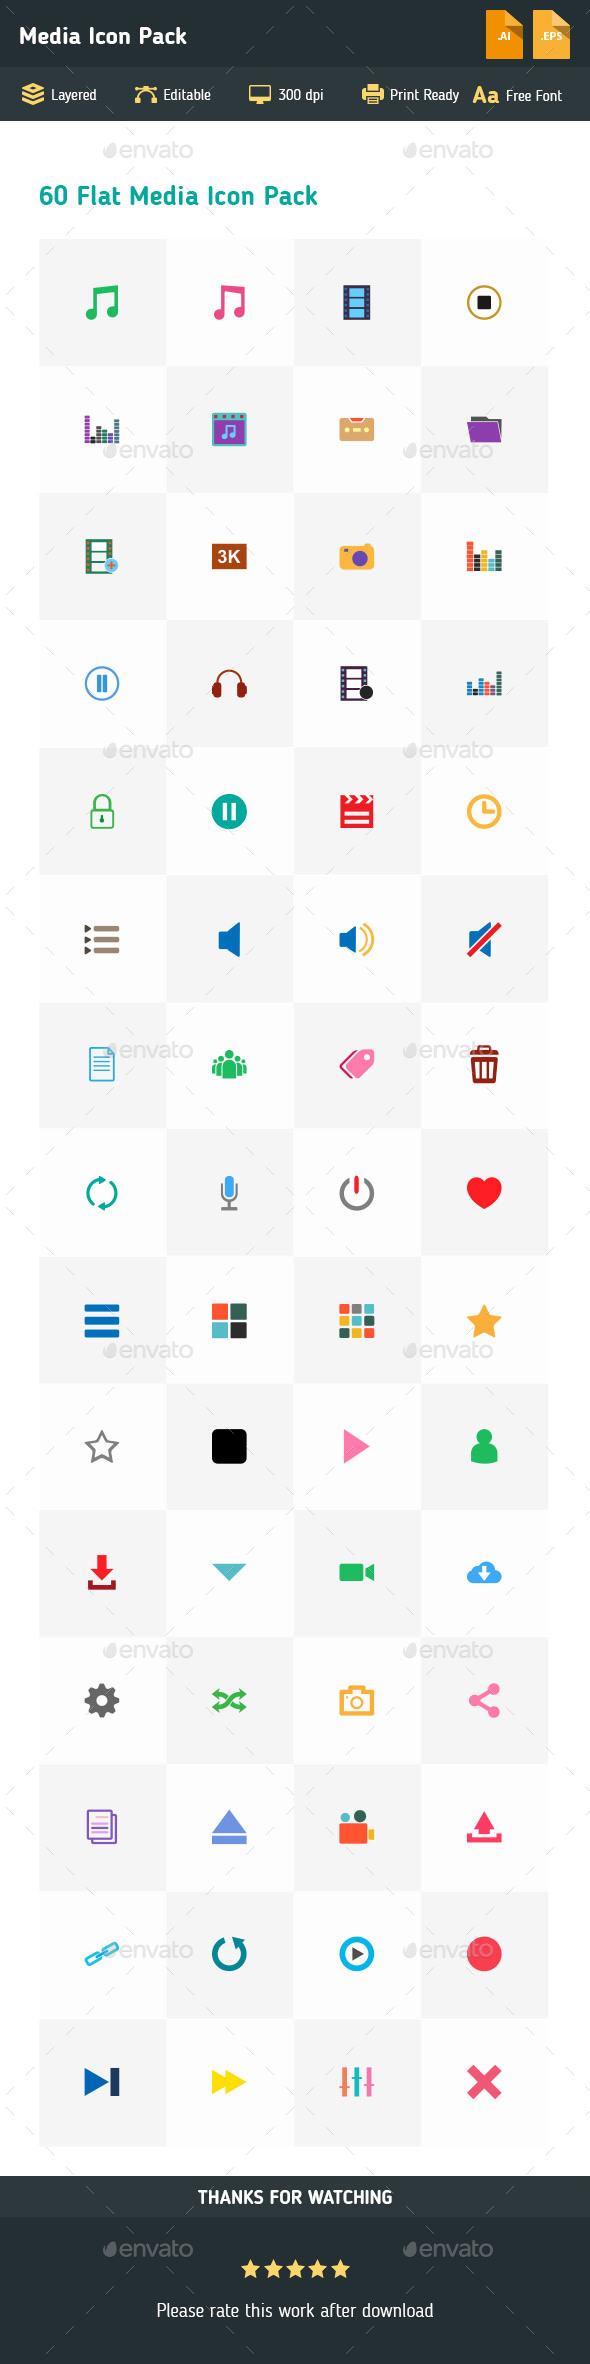 Media Icons Pack - Music icon pack - 60 icon